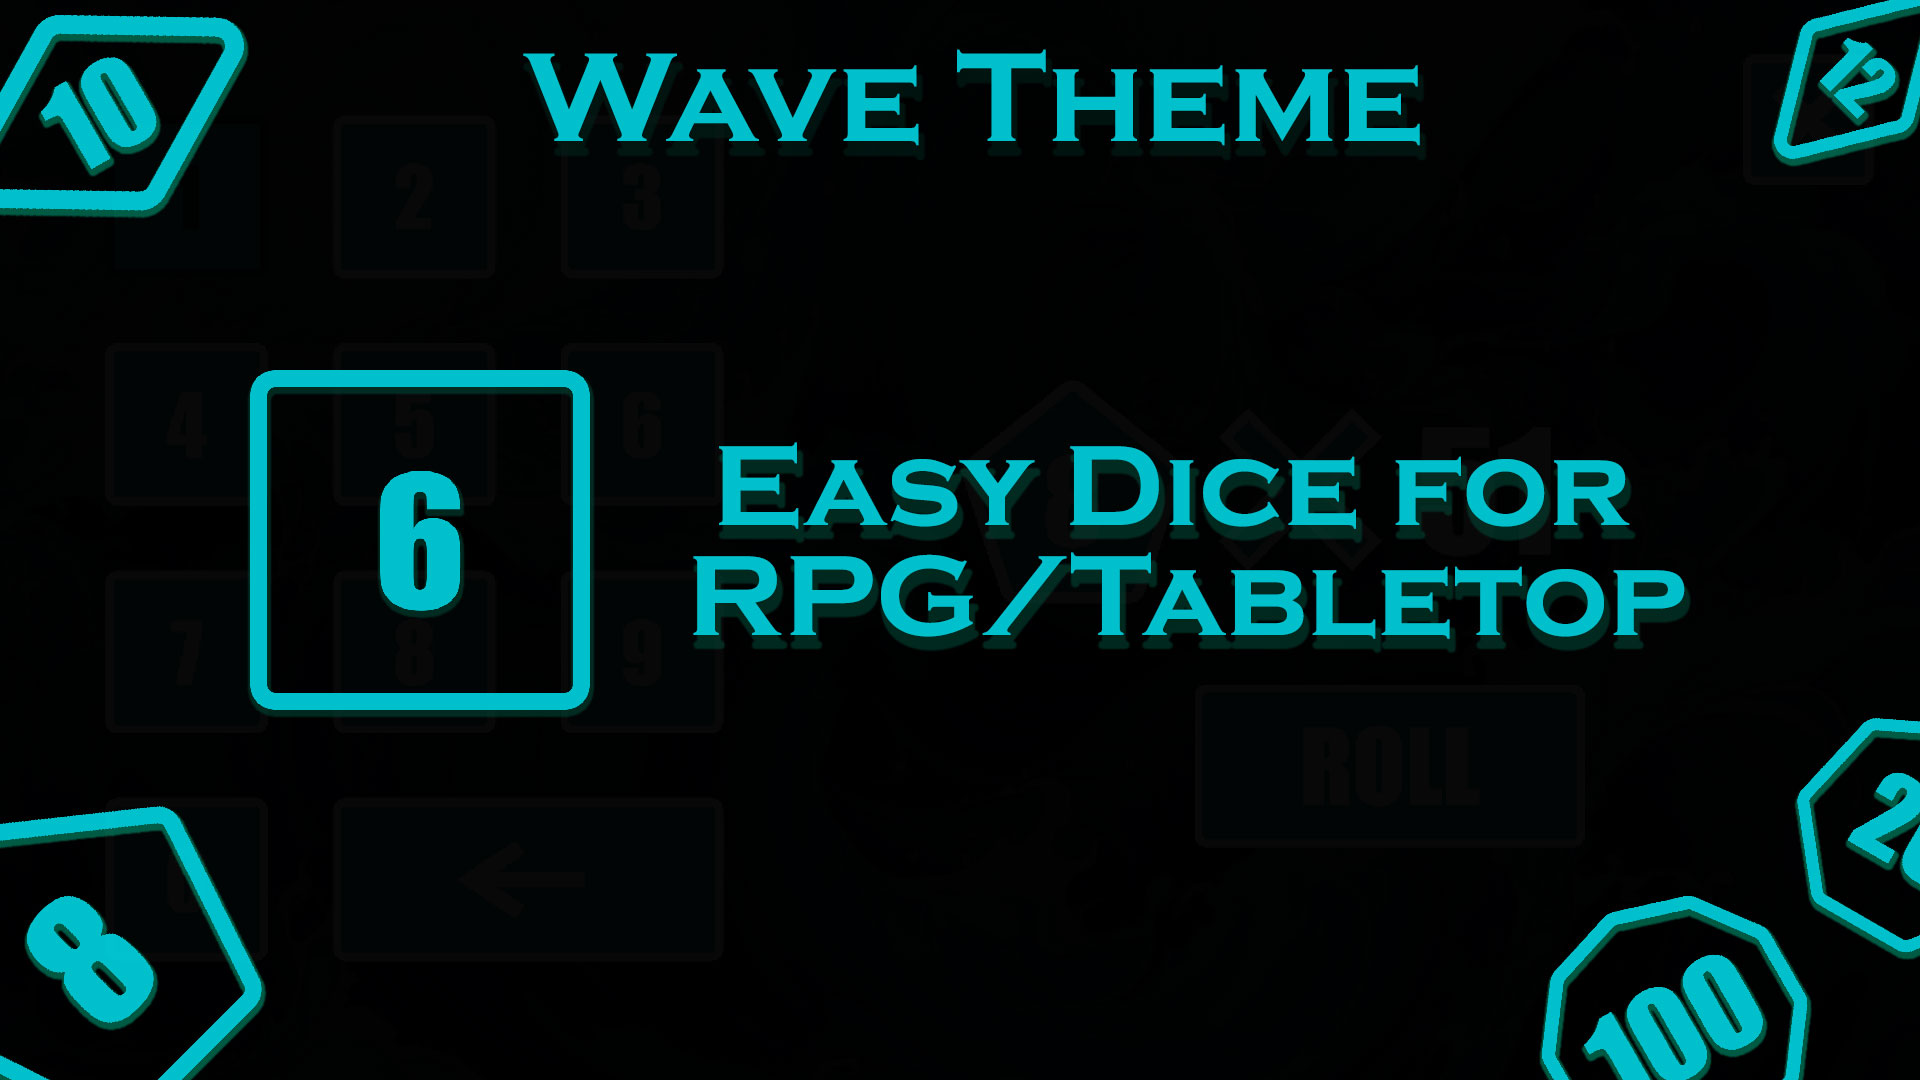 Easy Dice for RPG/Tabletop - Wave Theme